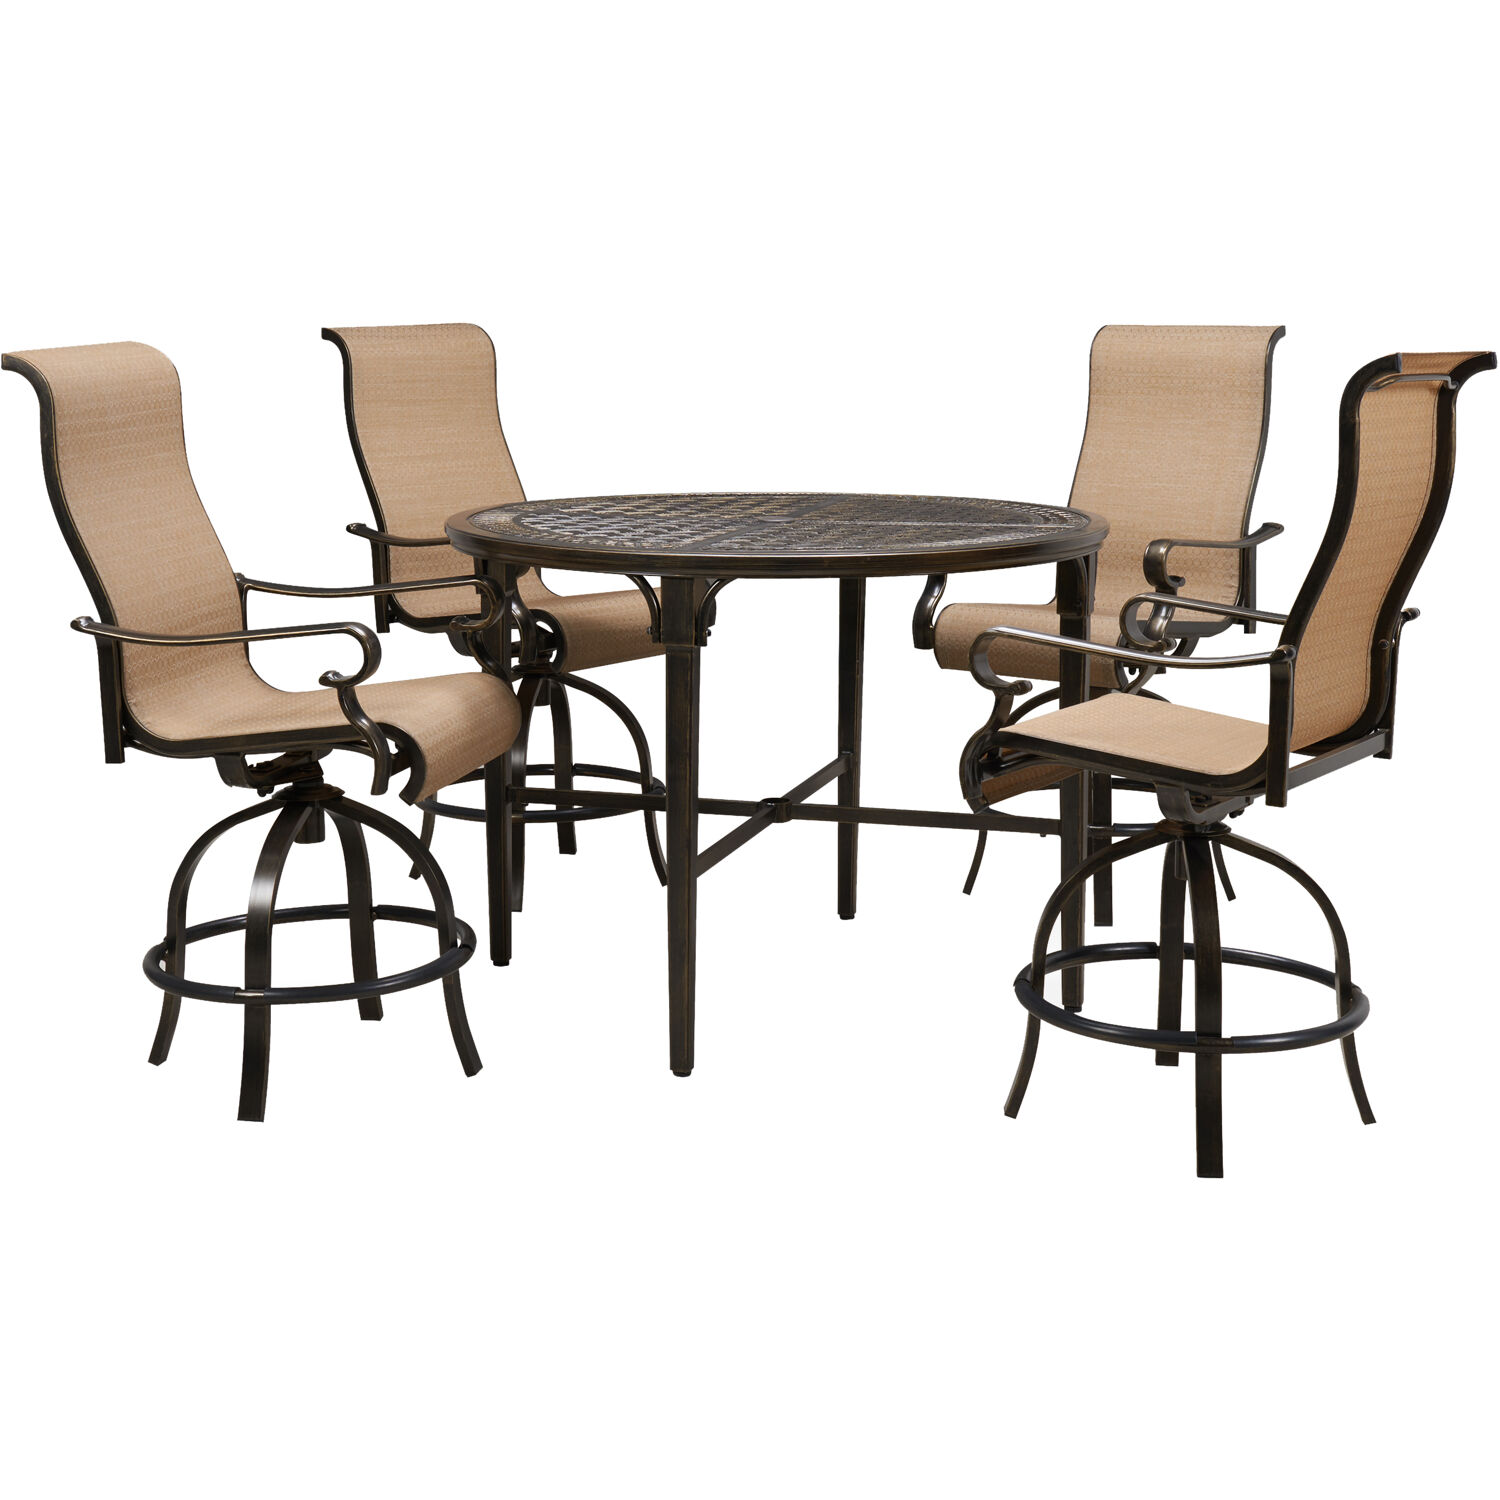 Hanover Brigantine 5-Piece Outdoor High-Dining Set with 4 Contoured-Sling Swivel Chairs and a 50-In. Round Cast-Top Table - image 1 of 9